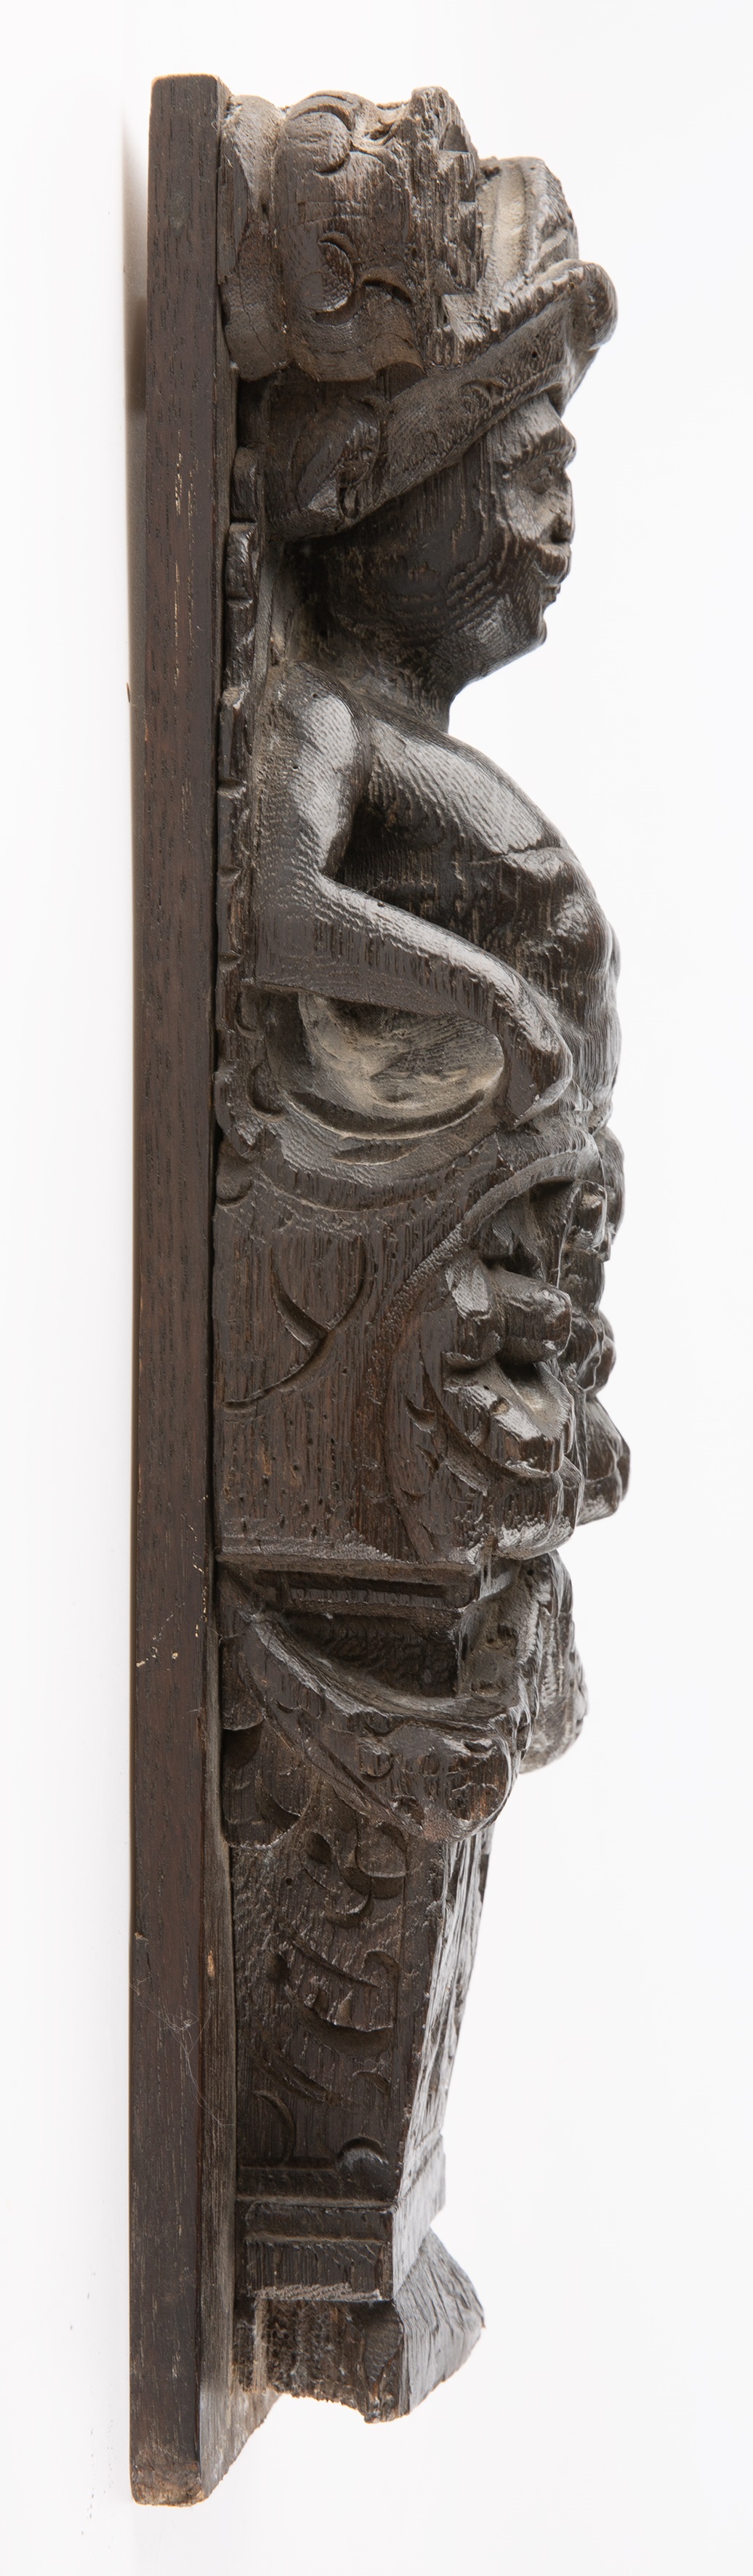 An early 17th century carved oak caryatid term 40cm x 12cm Chips, marks and small losses. - Image 3 of 4